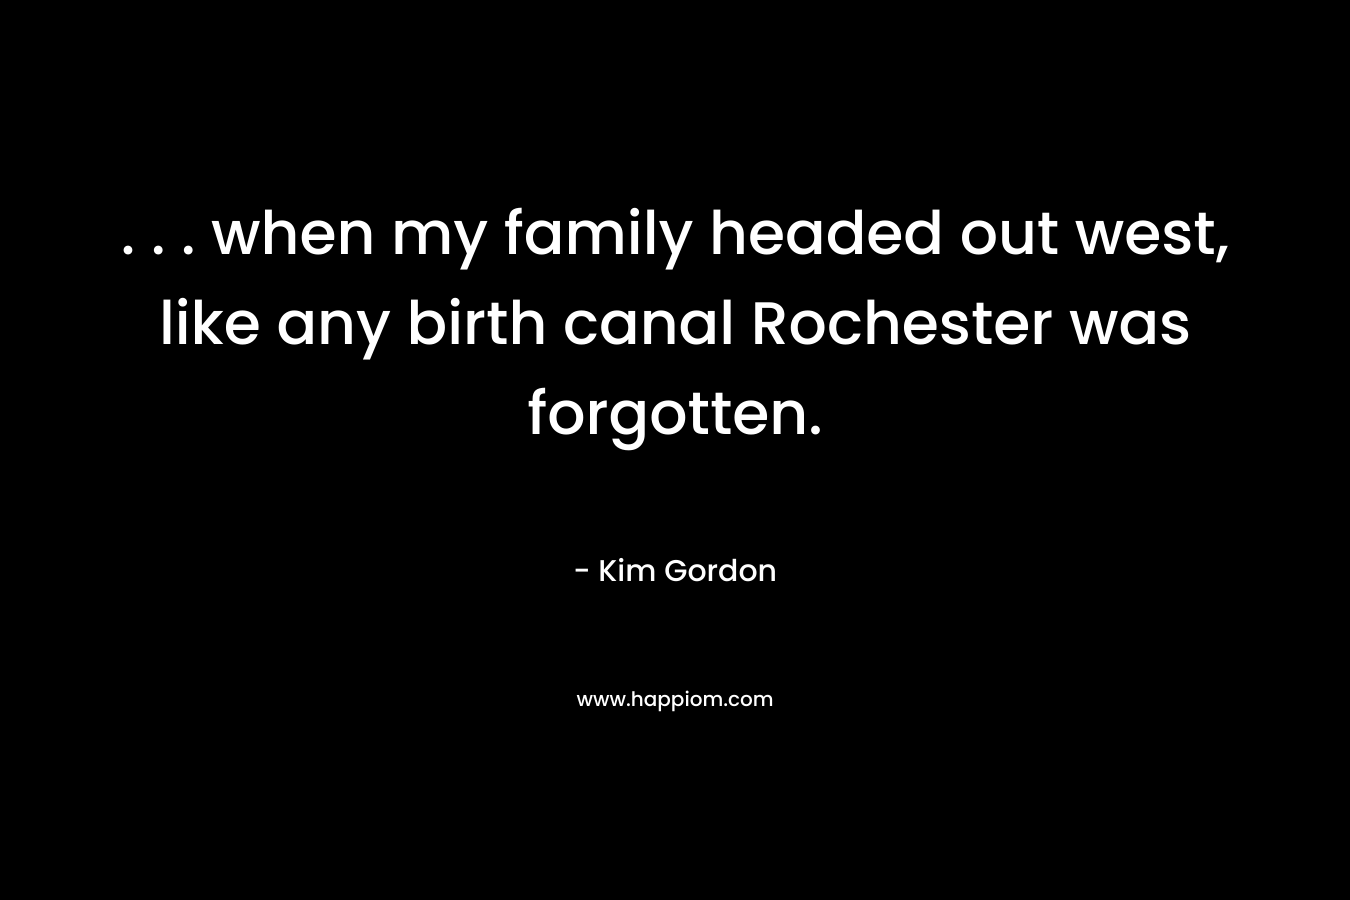 . . . when my family headed out west, like any birth canal Rochester was forgotten.